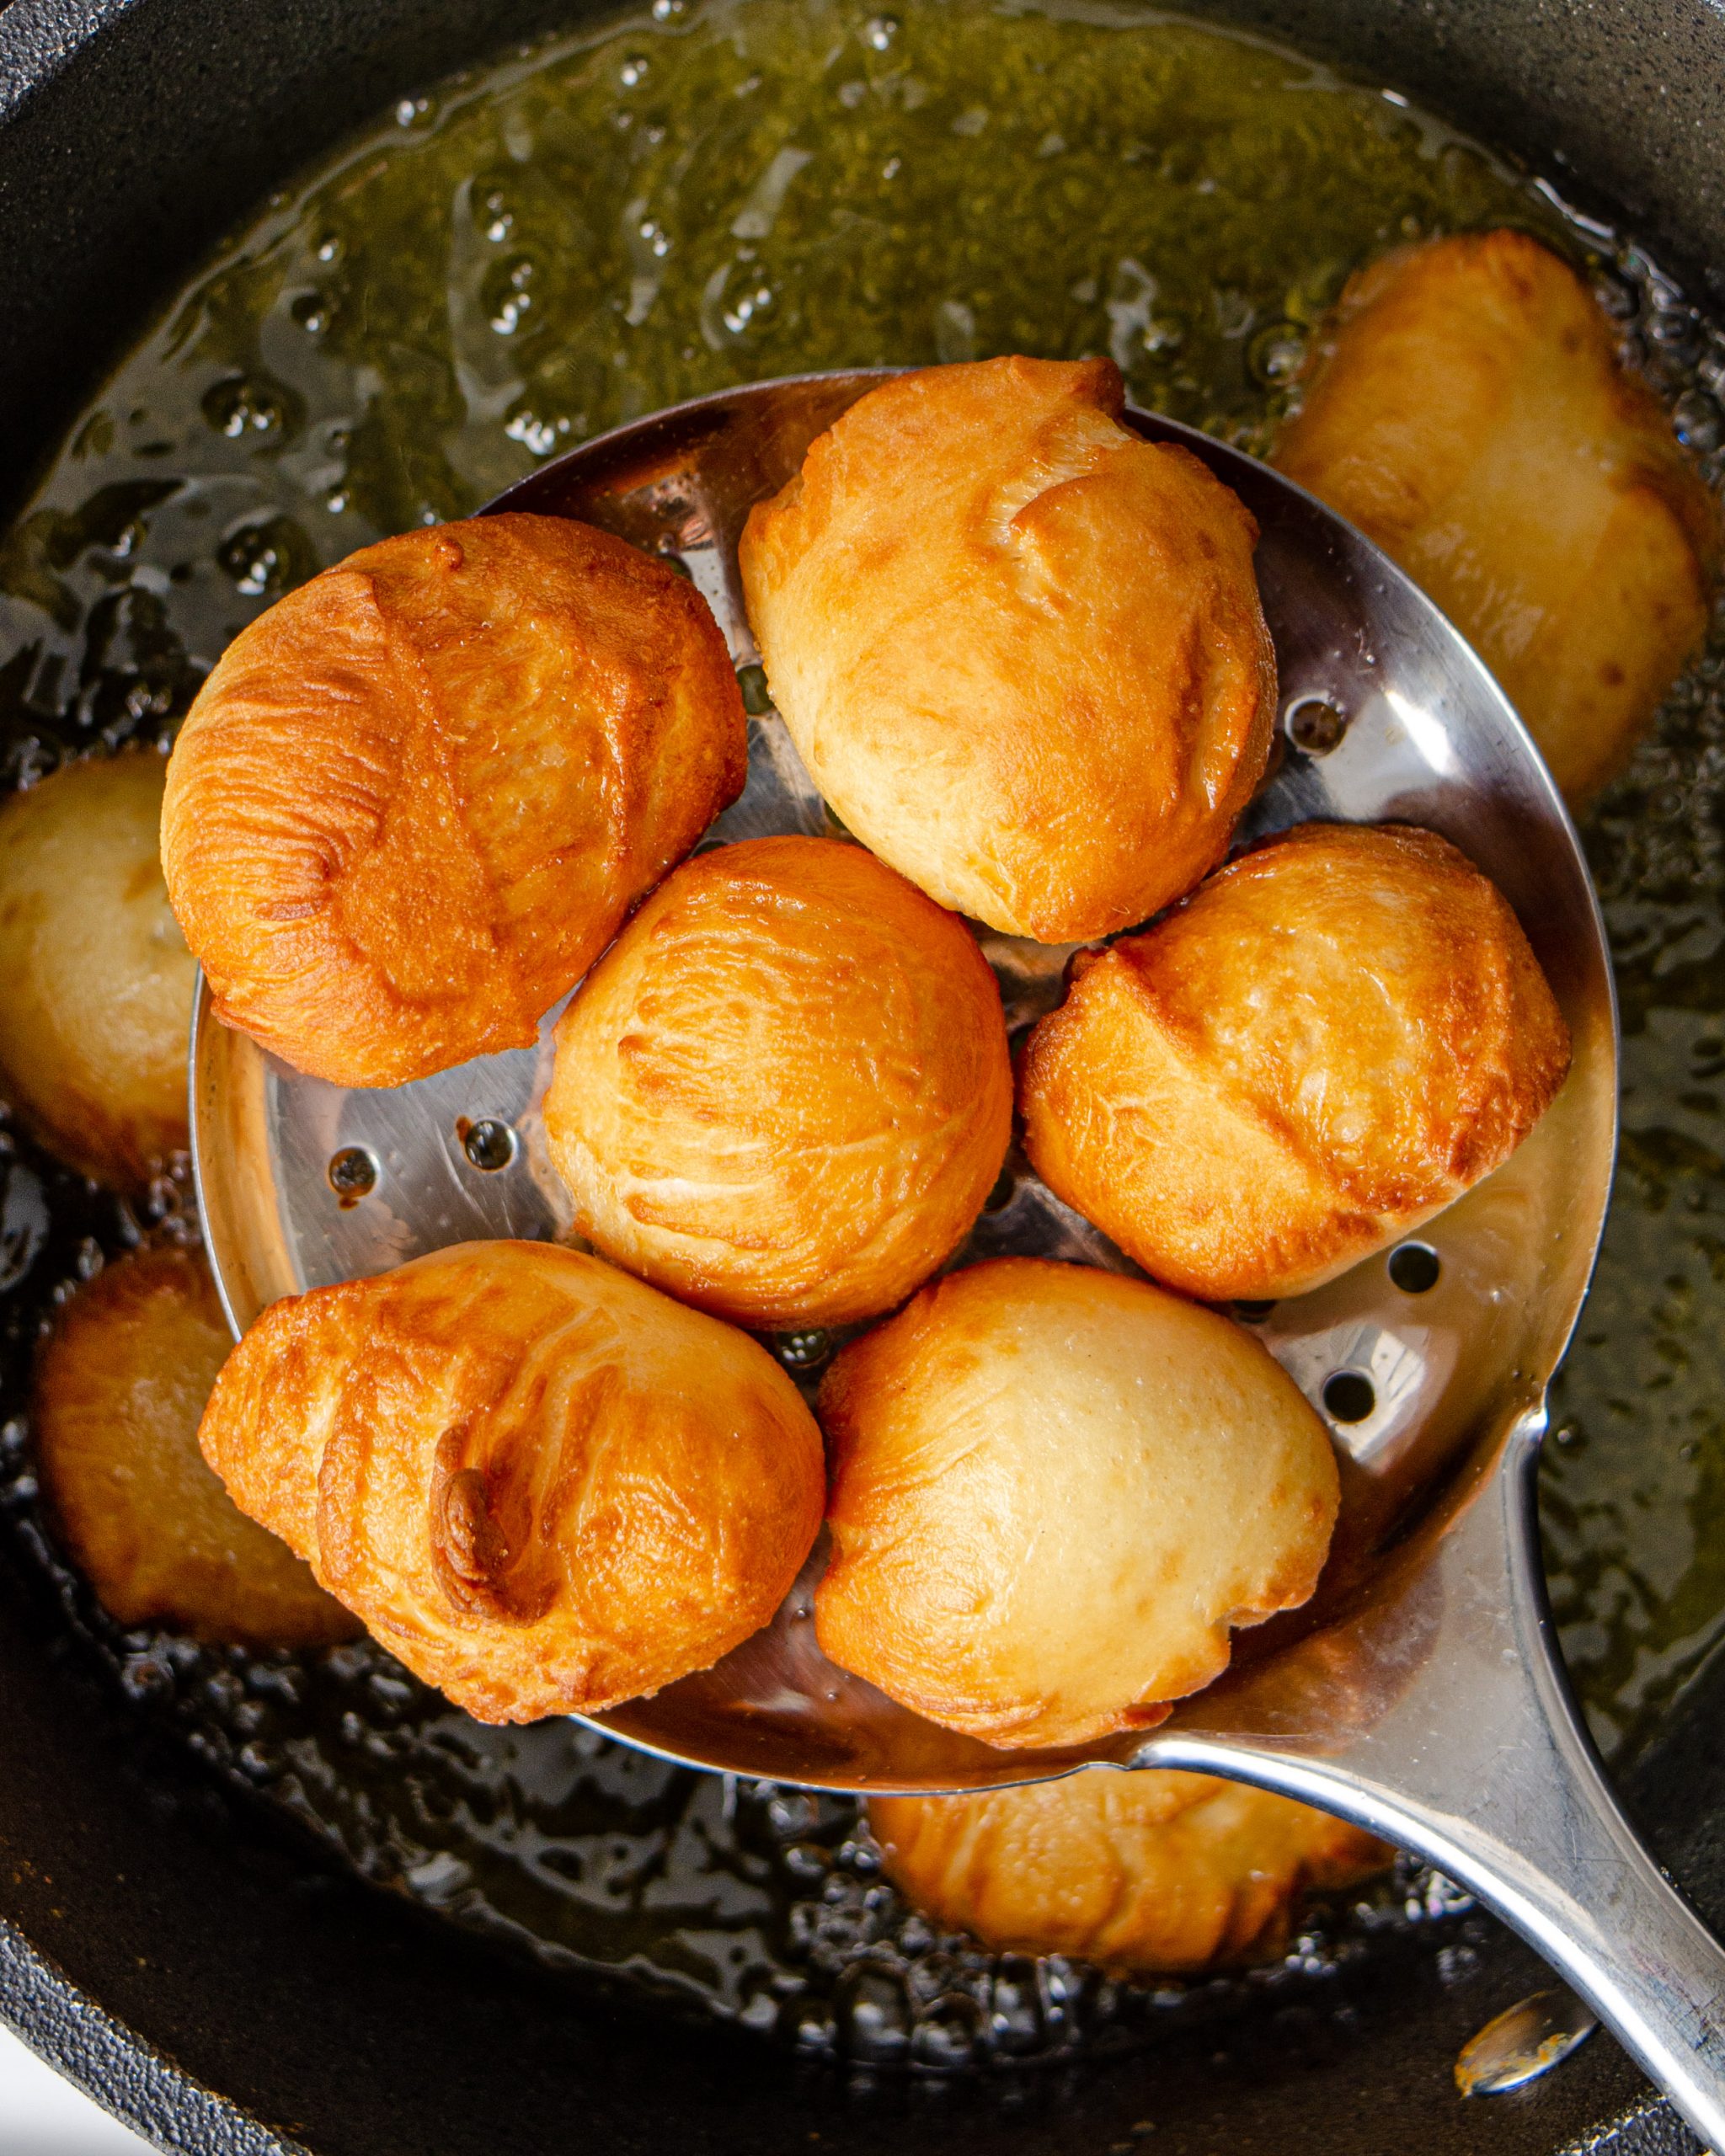 Cook the balls of dough for a few minutes in the oil until golden brown.